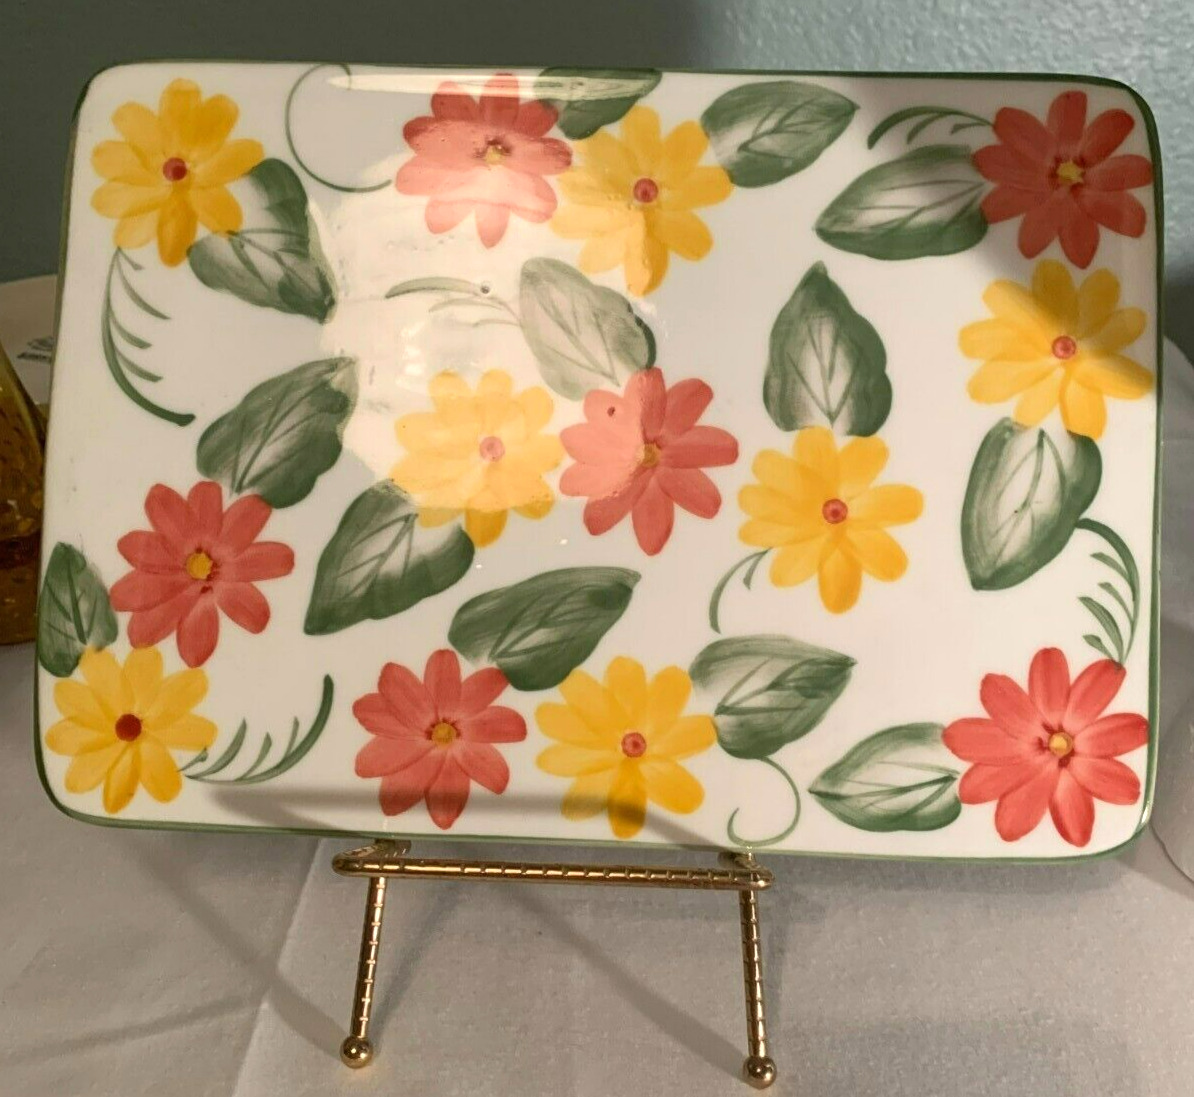 Temptations by Tara Yellow/Orange flowered trivet 8X12 inches.  So colorful